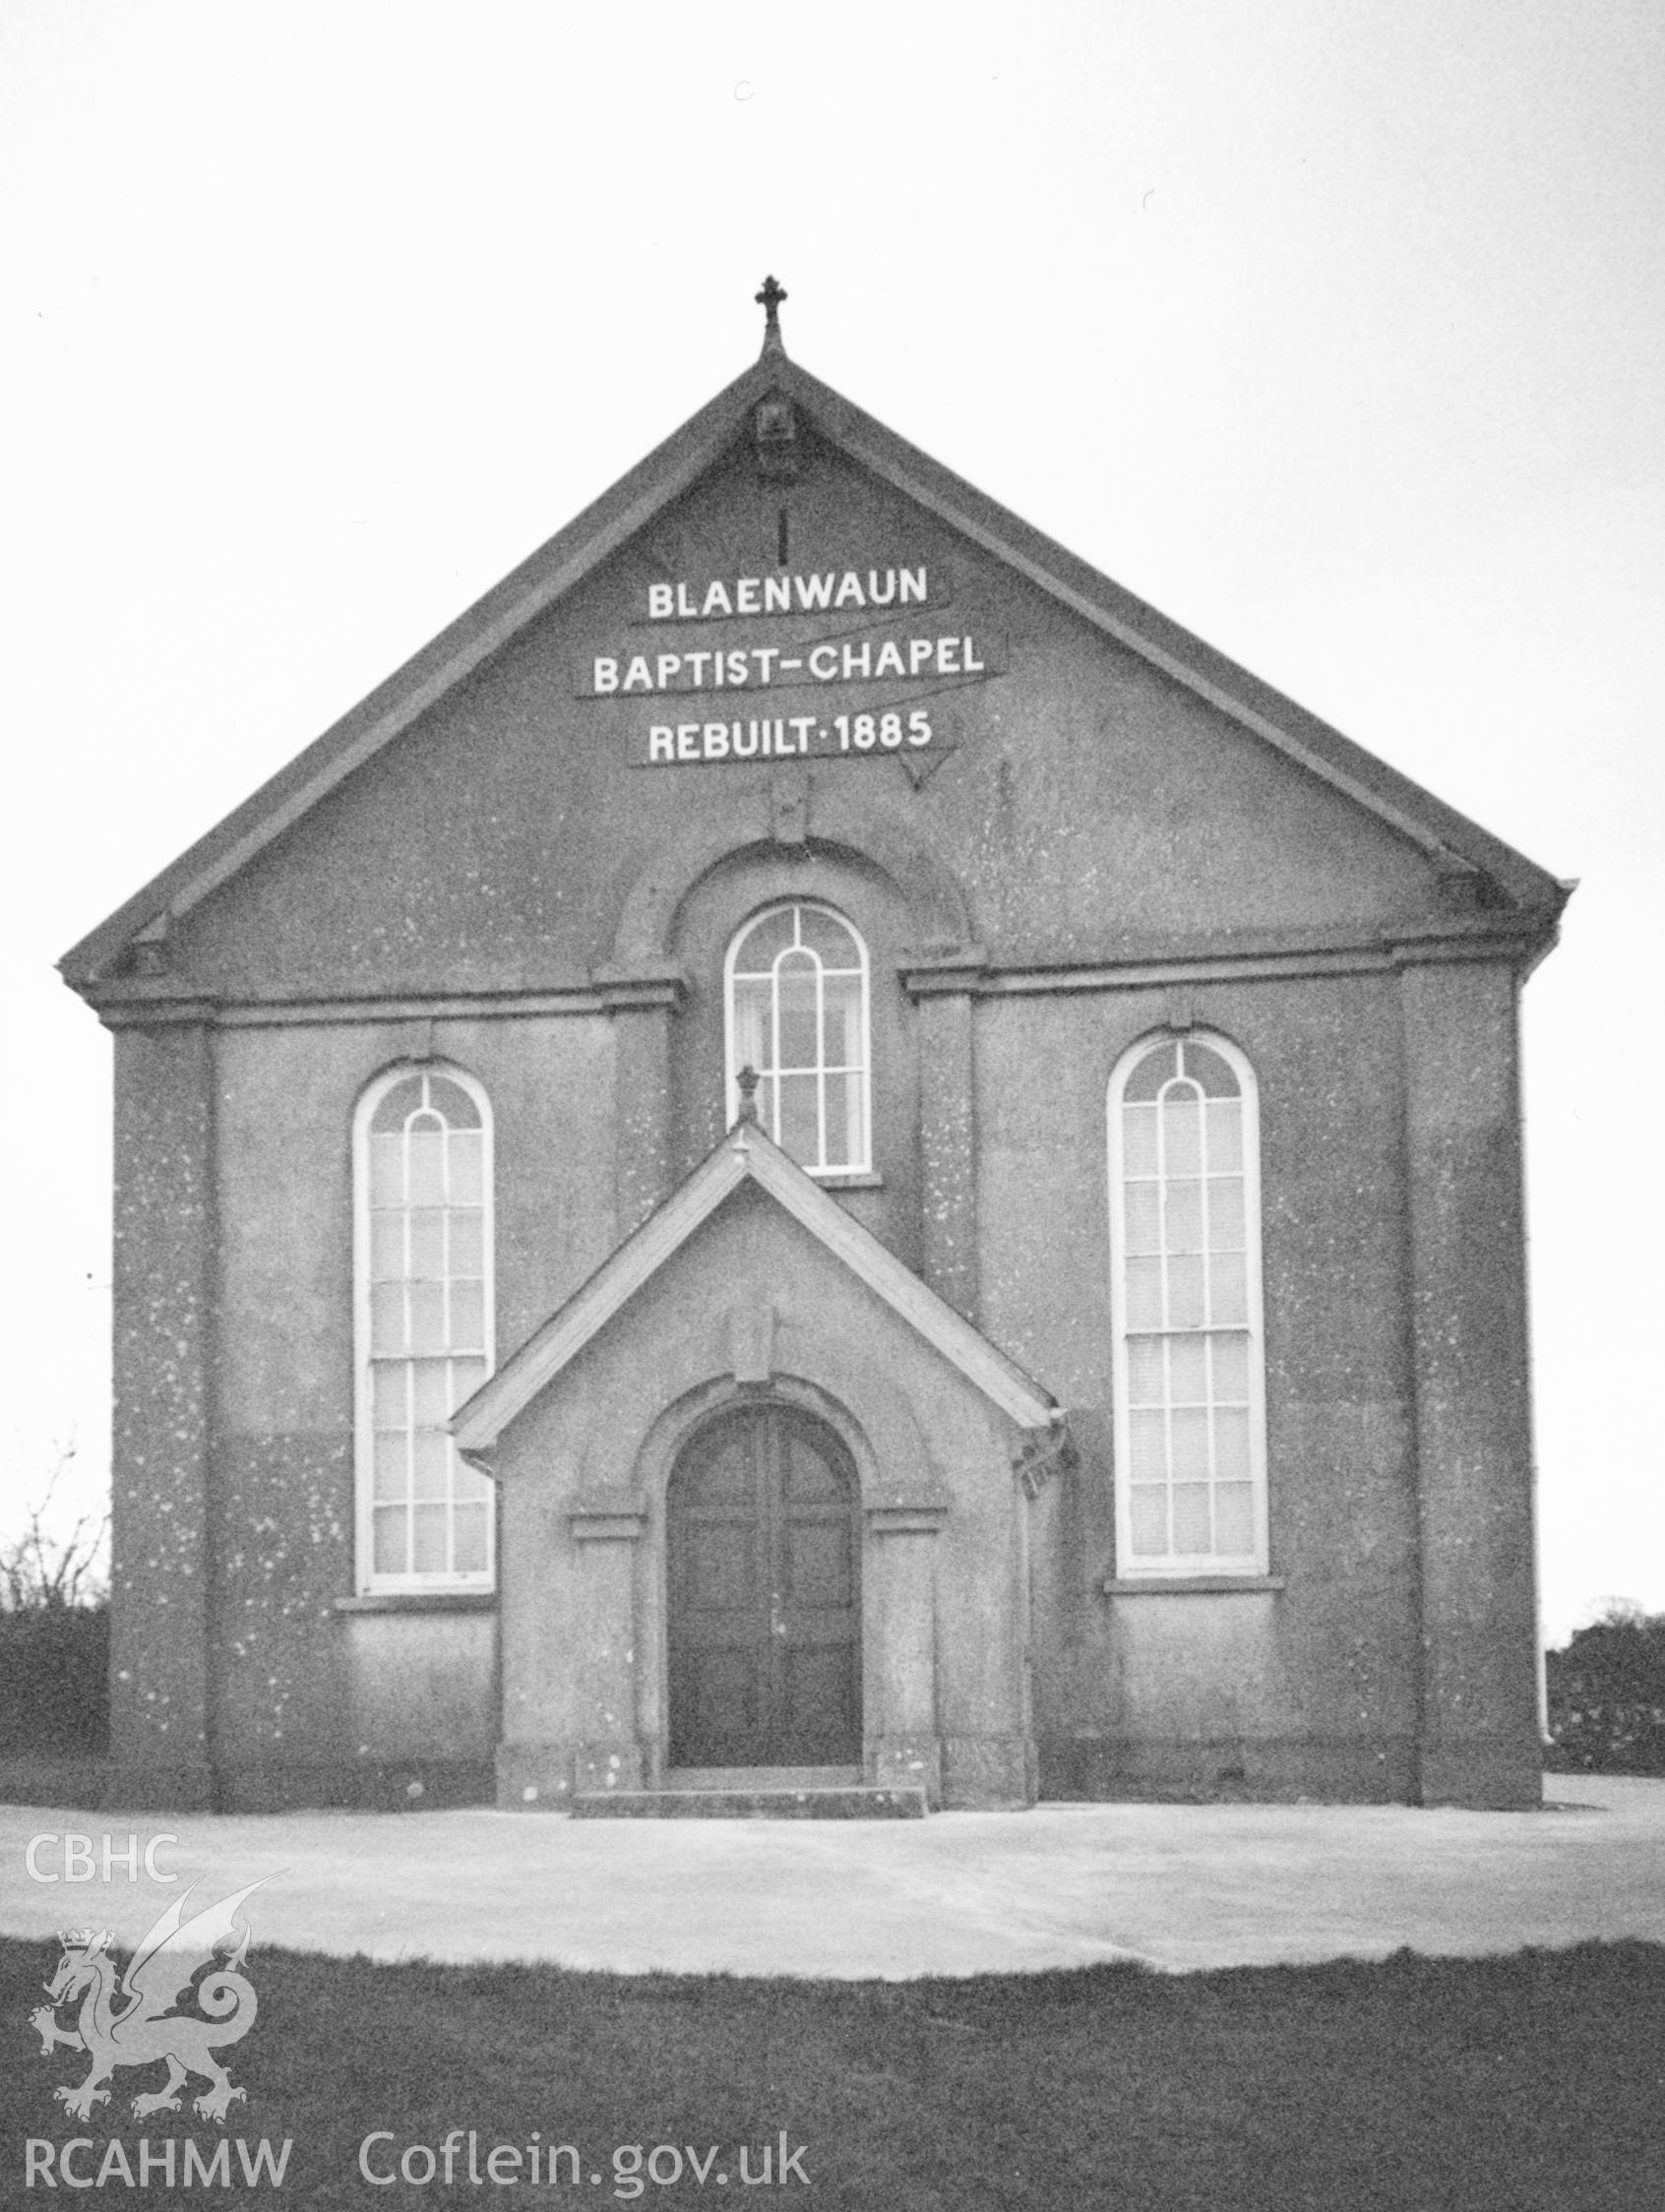 Digital copy of a black and white photograph showing an exterior view of Blaenwaun Welsh Baptist Chapel, St Dogmaels, taken by Robert Scourfield, c.1996.